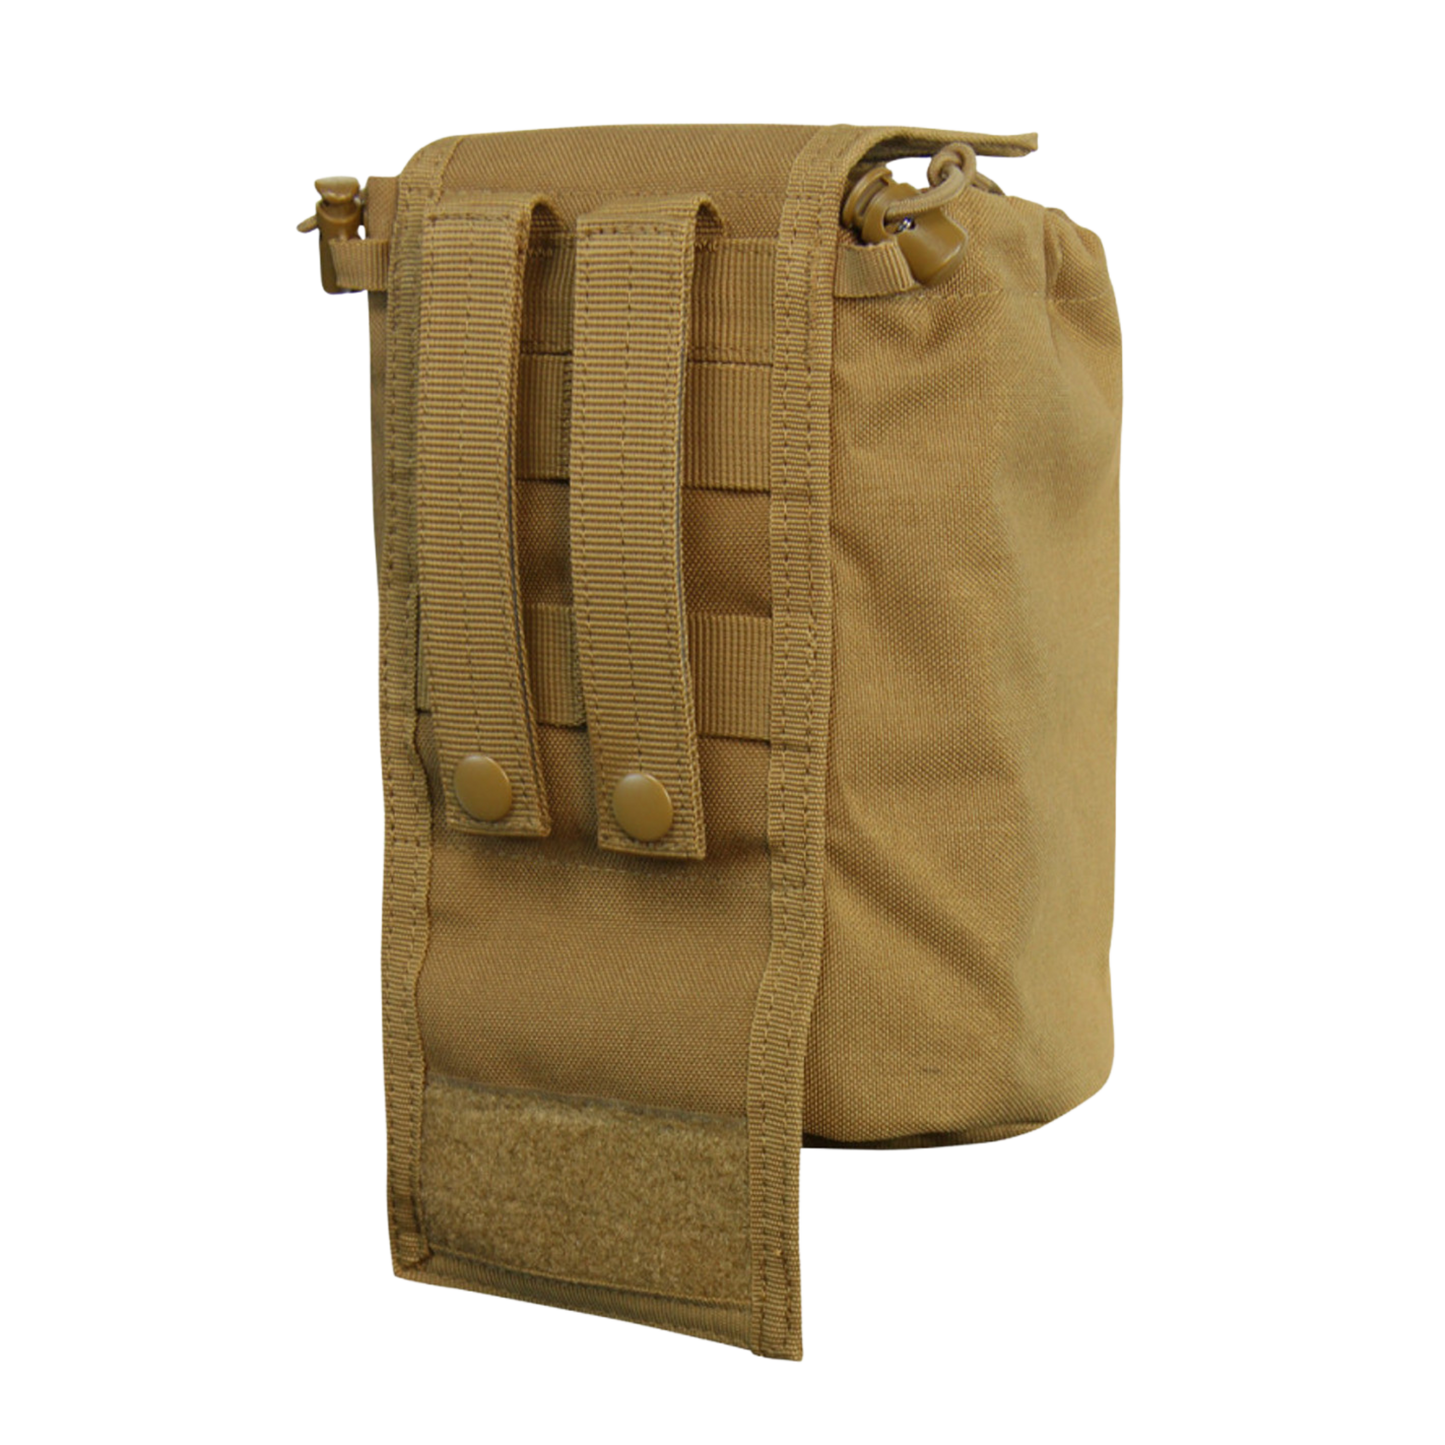 Condor Roll Up Utility Pouch